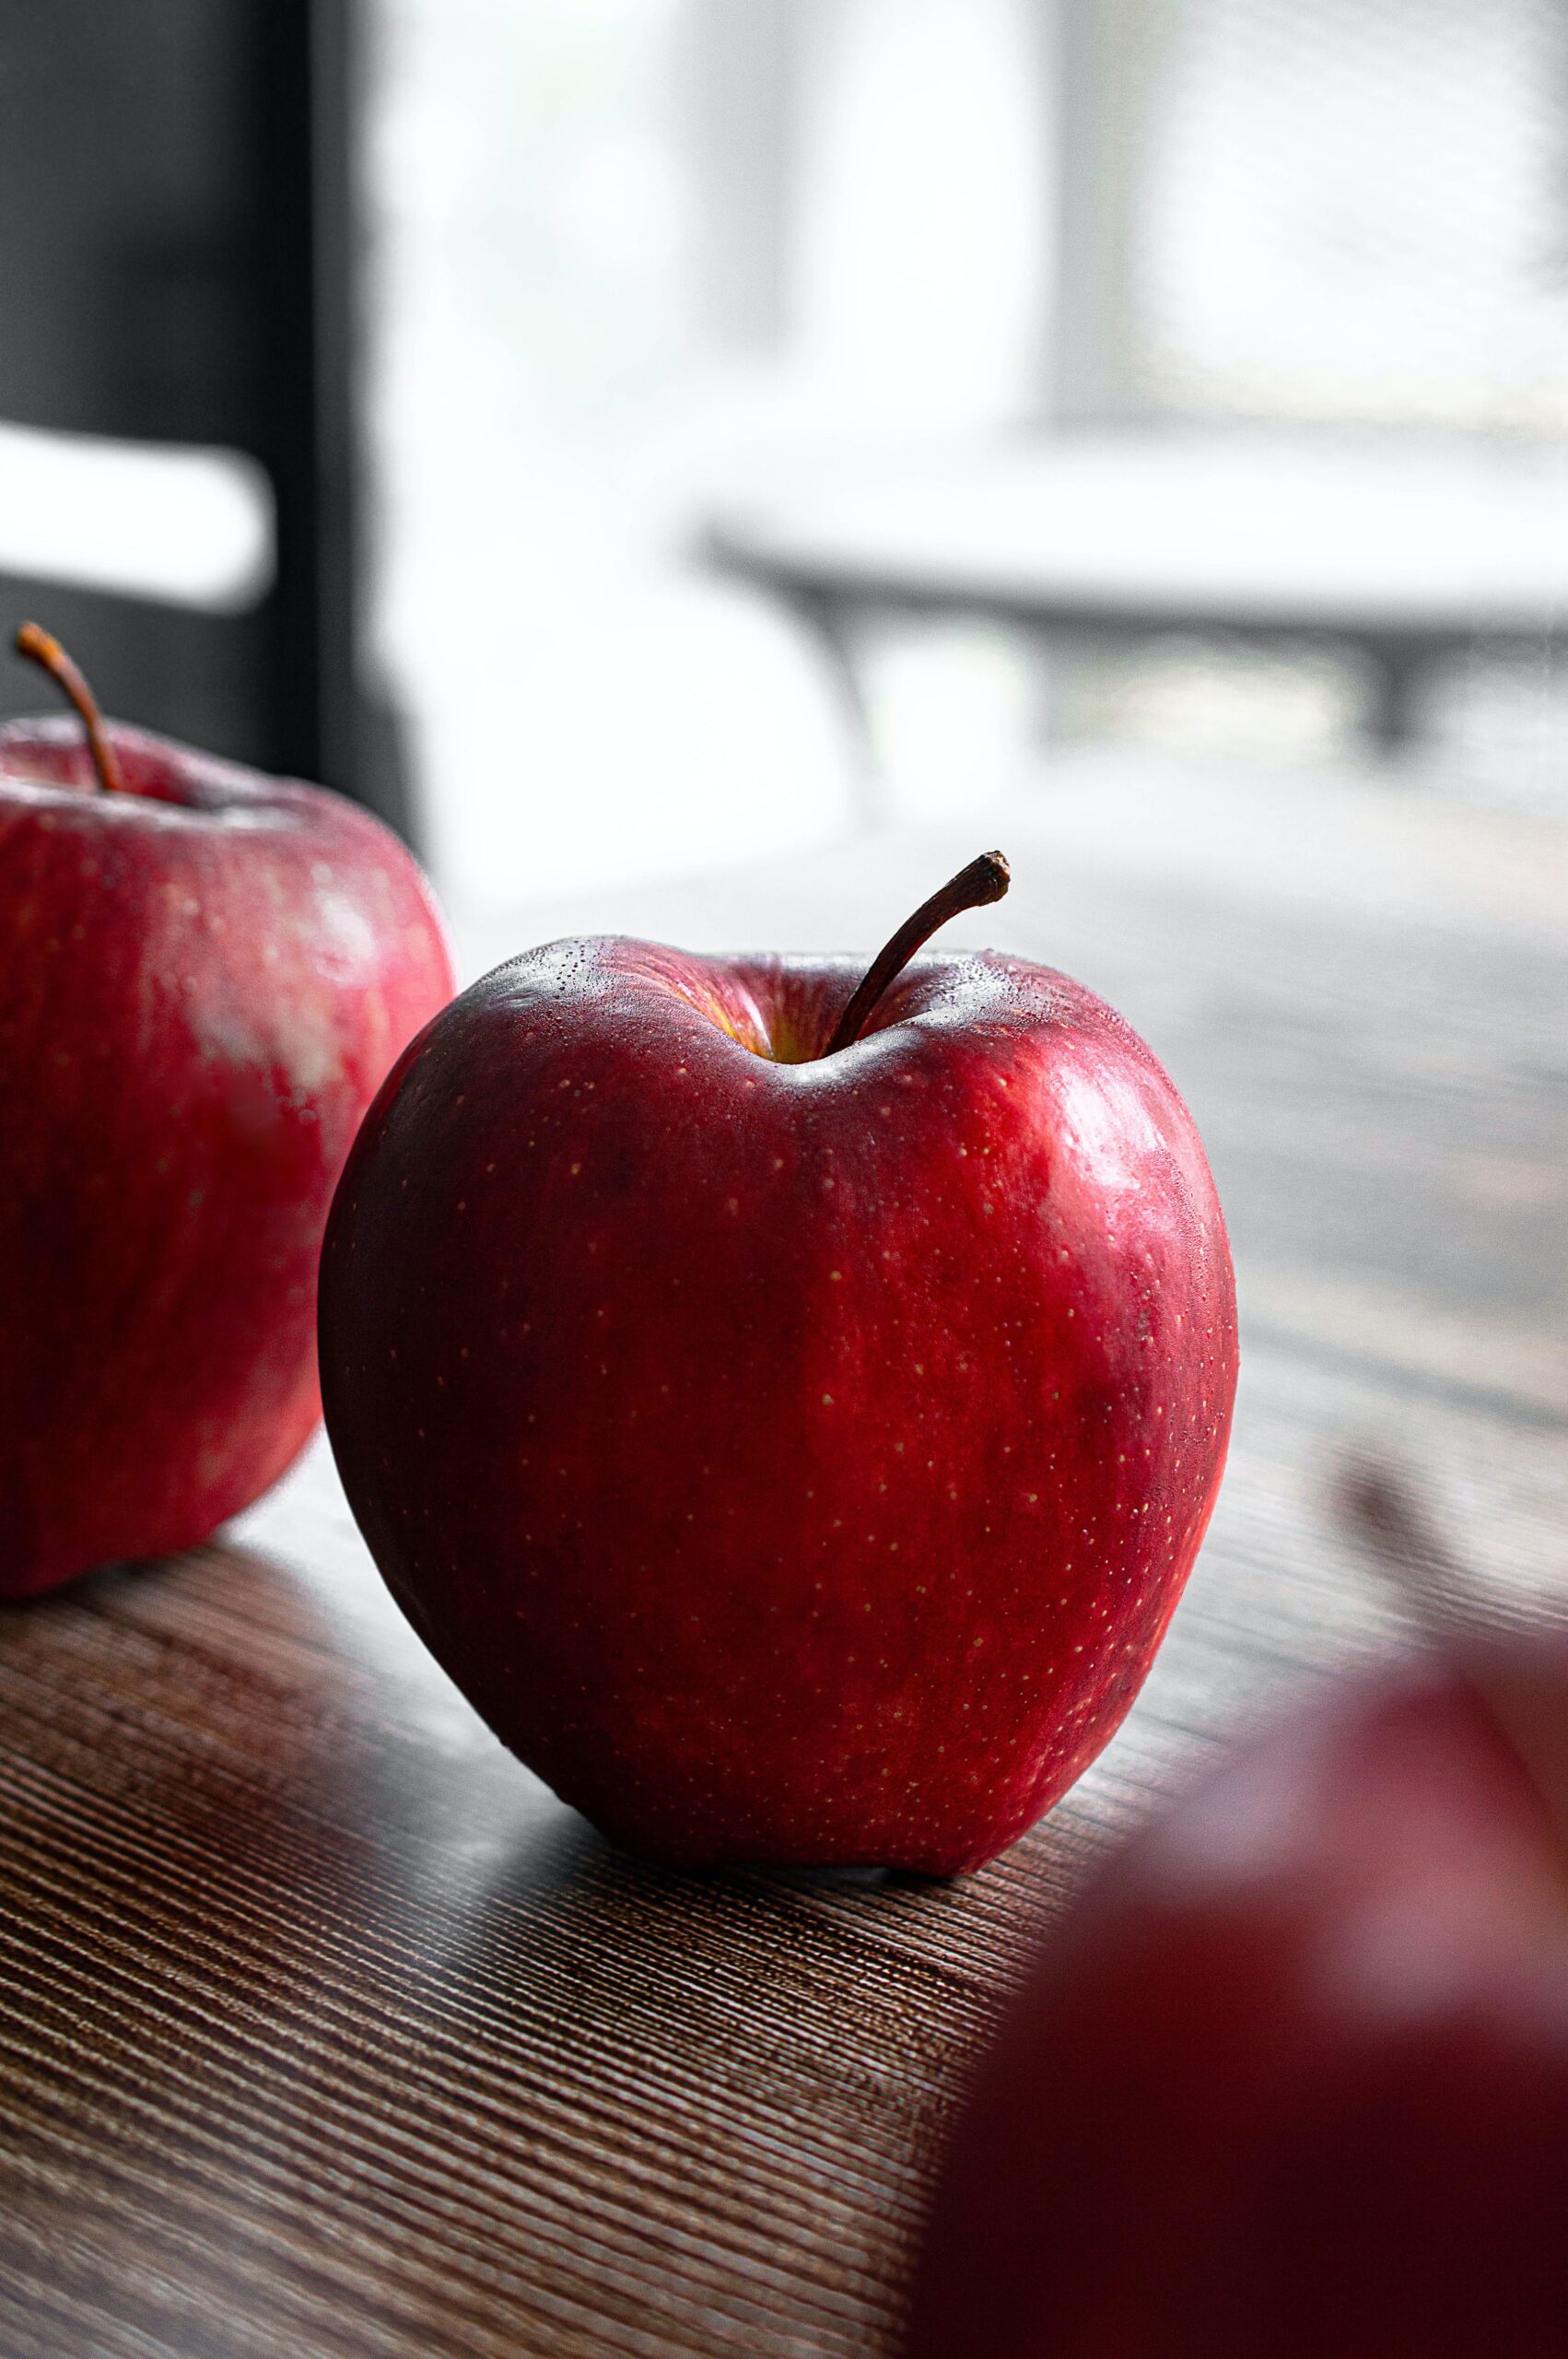 Apples, an excellent fruit according to Ayurveda